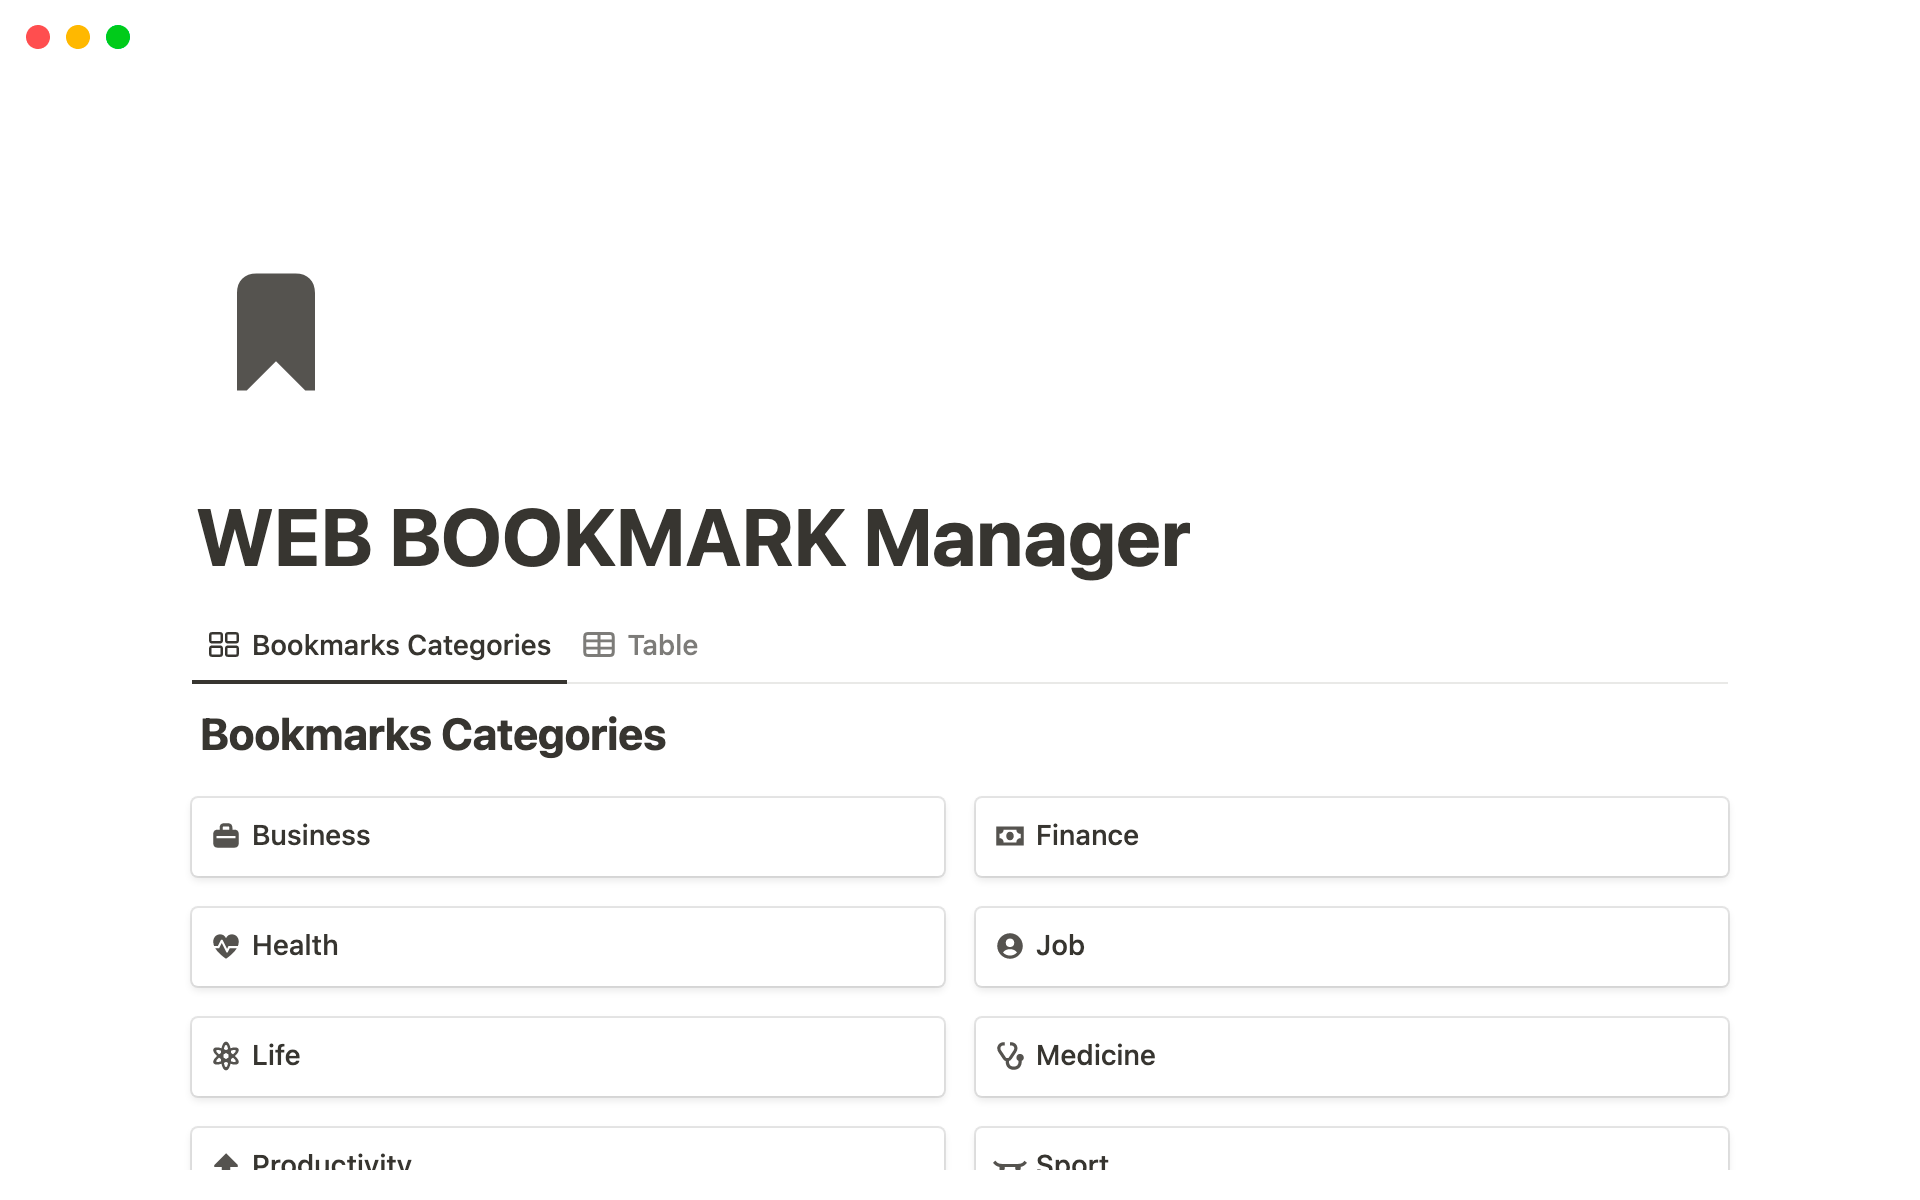 Web Bookmark Manager lets you save literally anything on the web that has a link into your Notion workspace. You can read it later, overview it or just save it as a source of information.